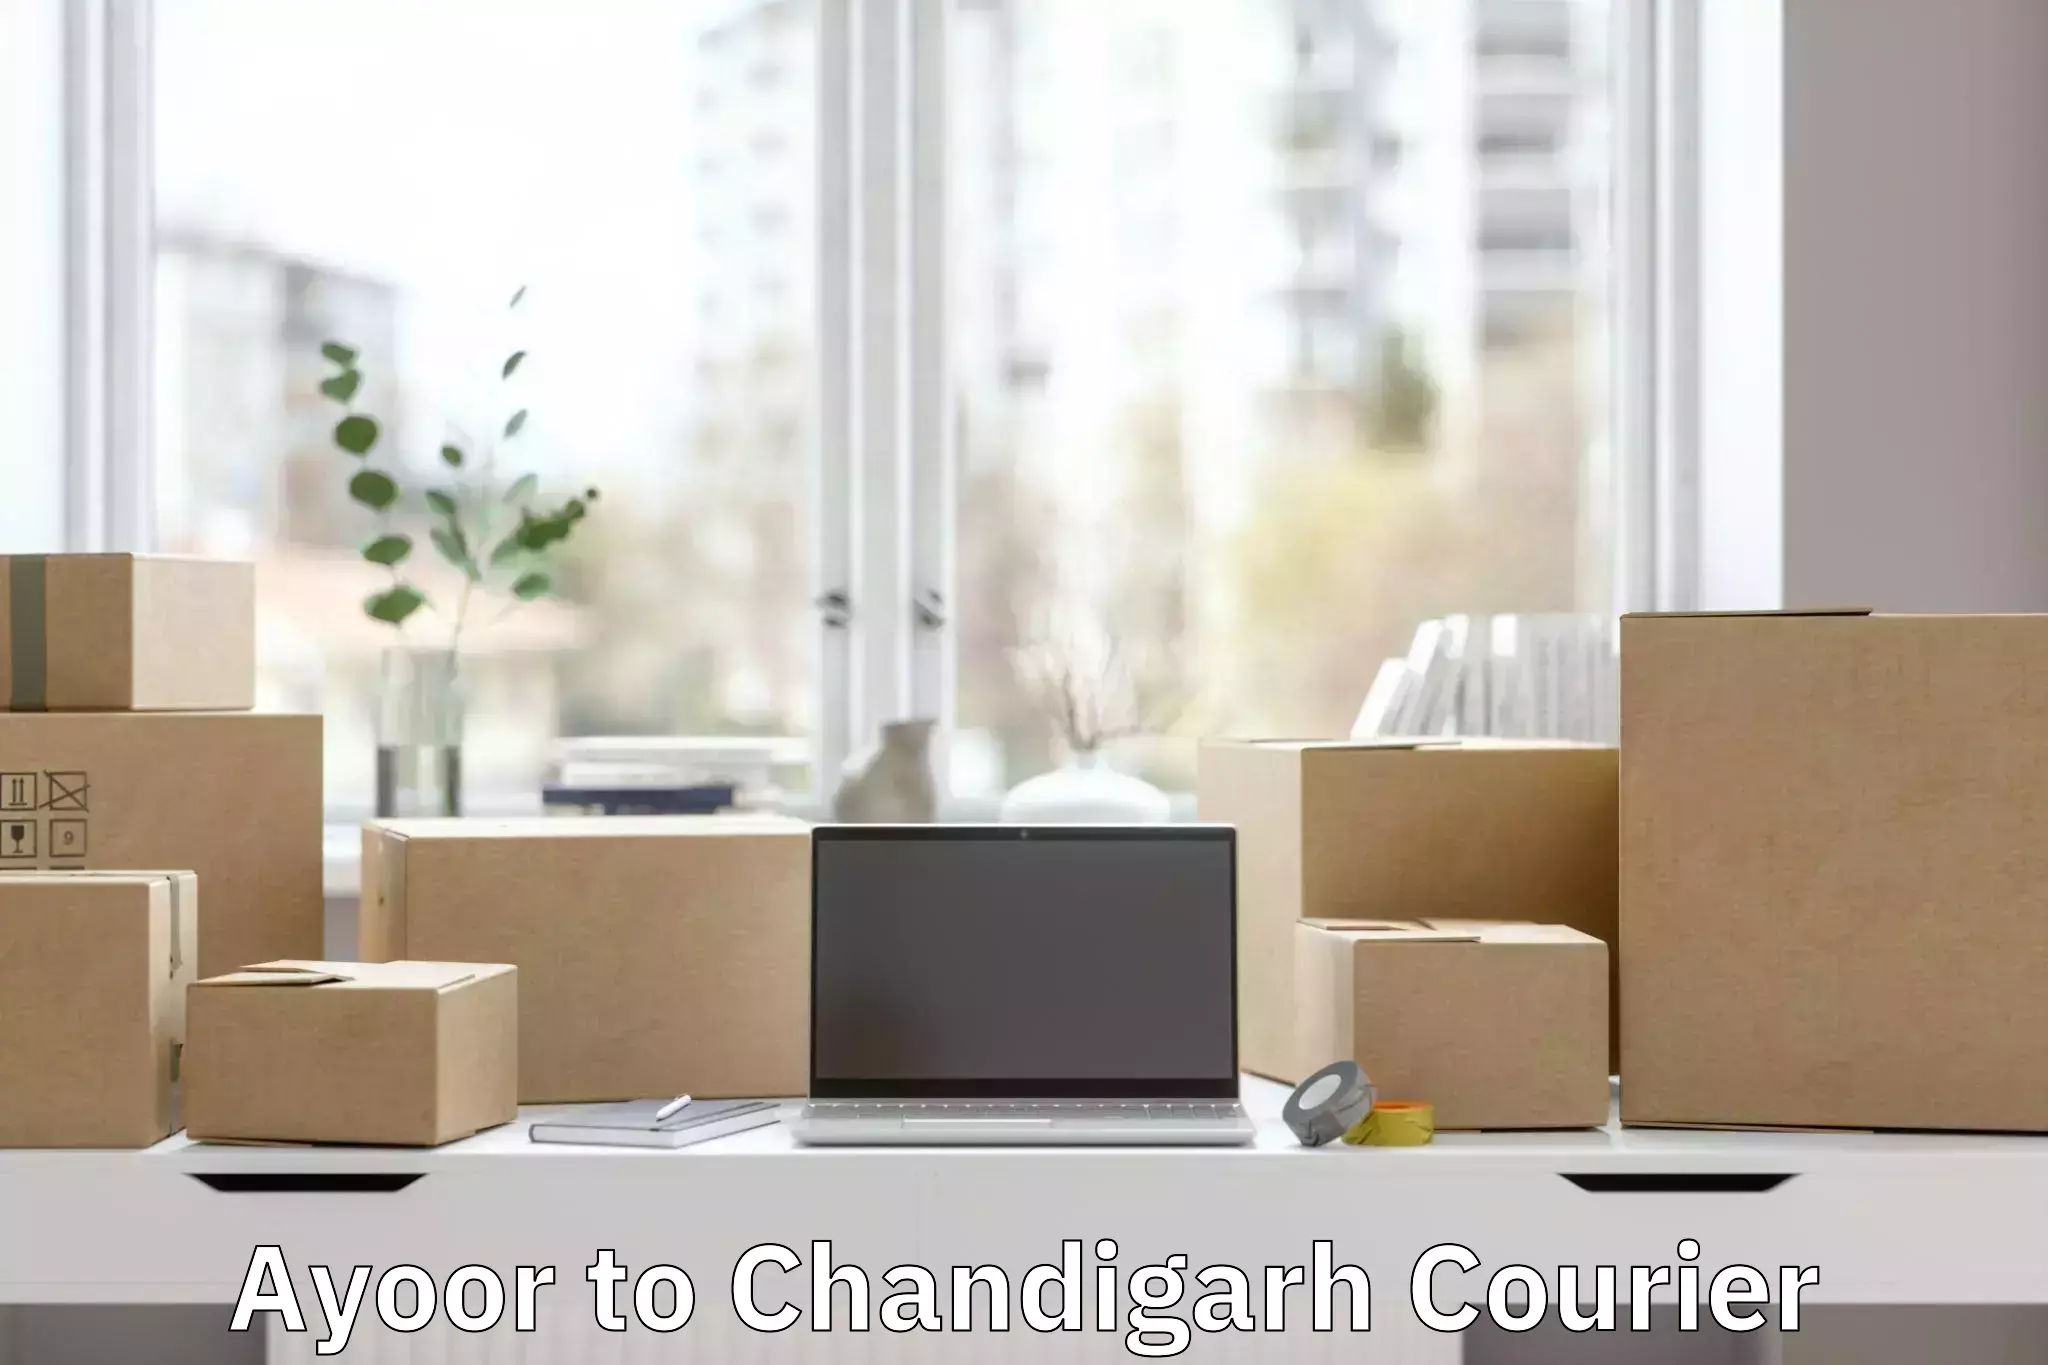 Luggage transport consulting Ayoor to Chandigarh